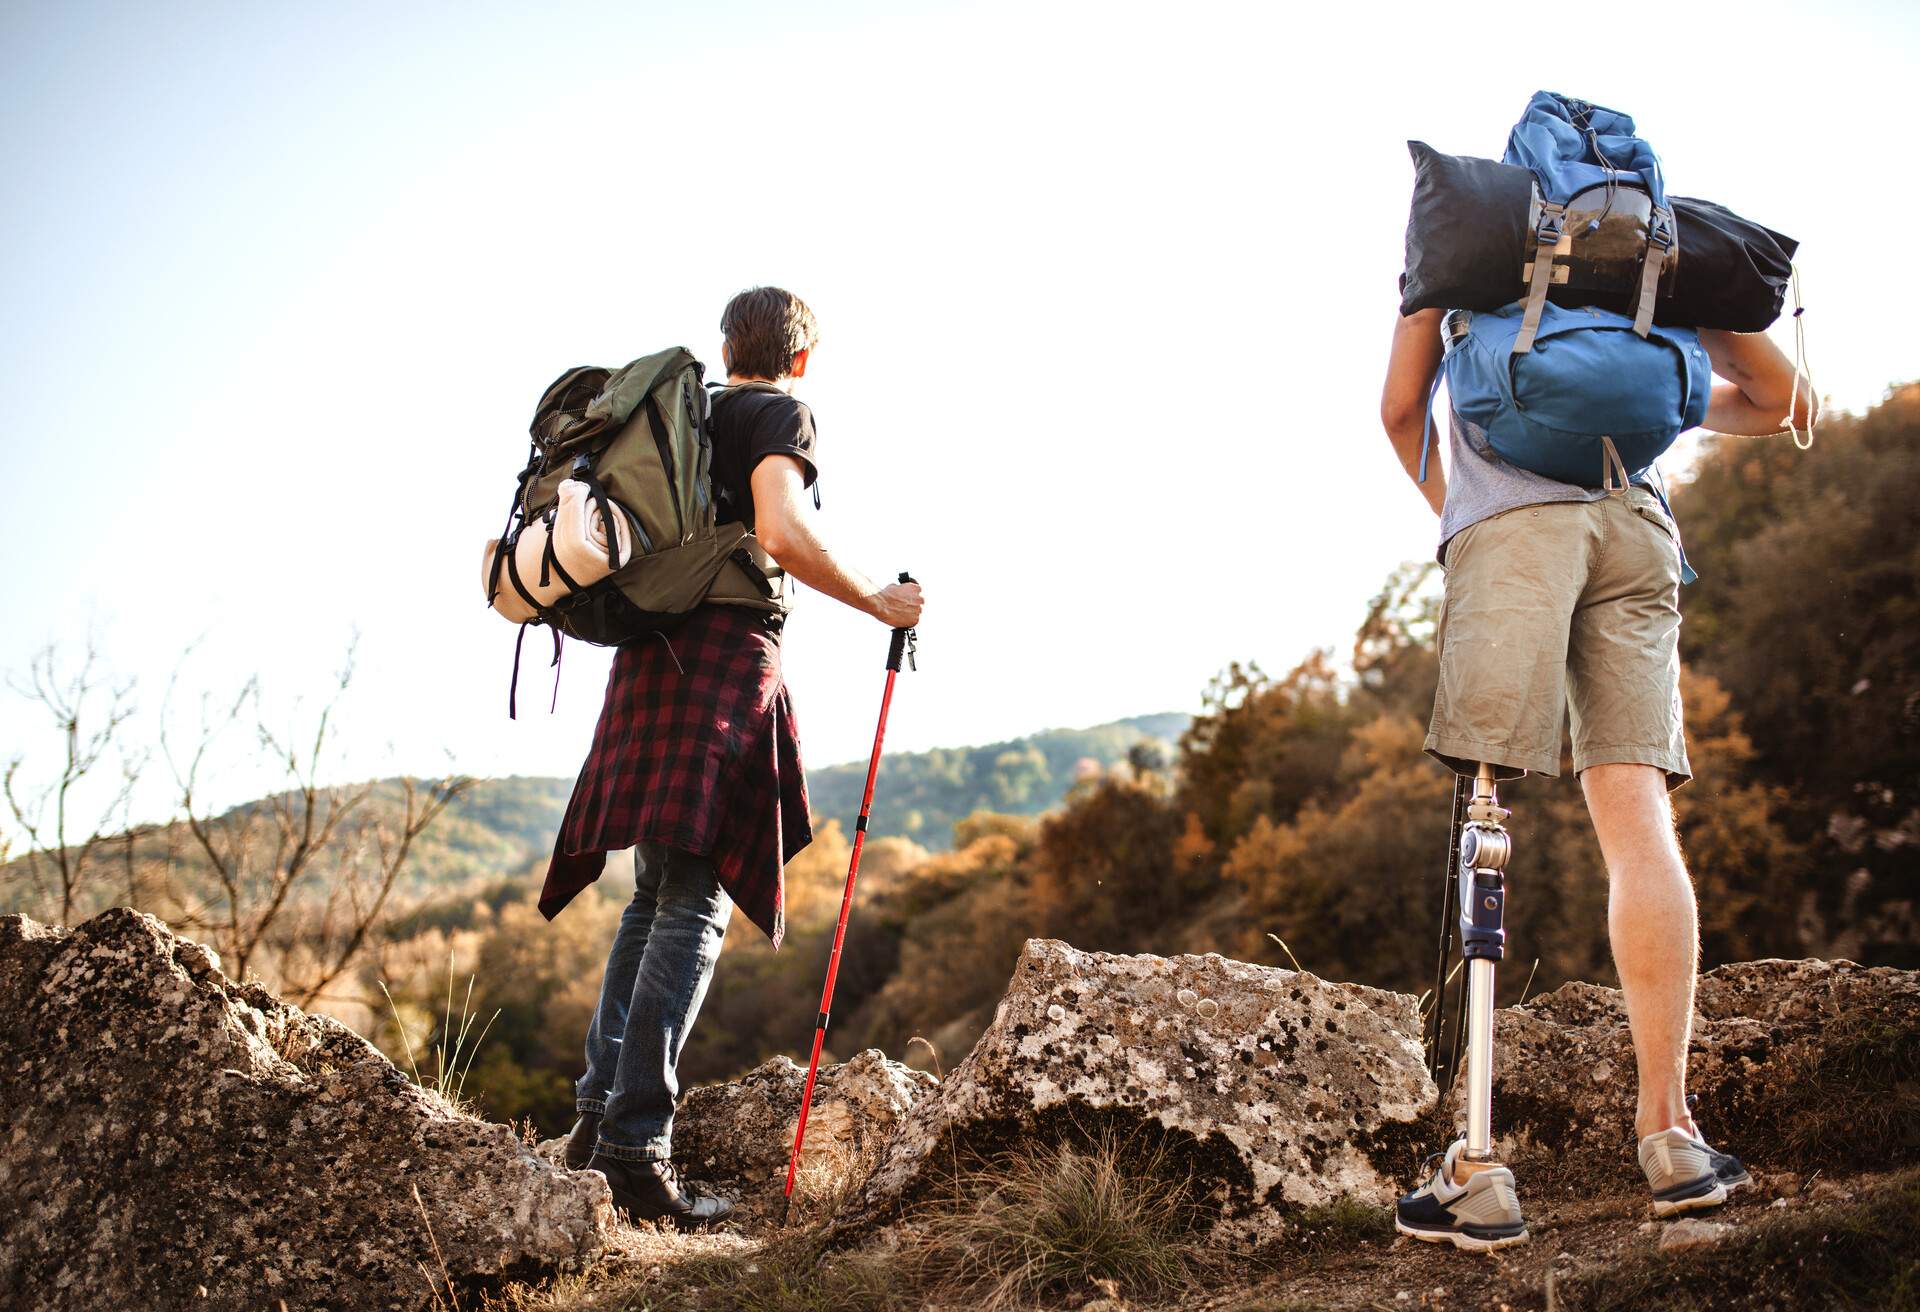 Disabled young man on a hike with his male friend